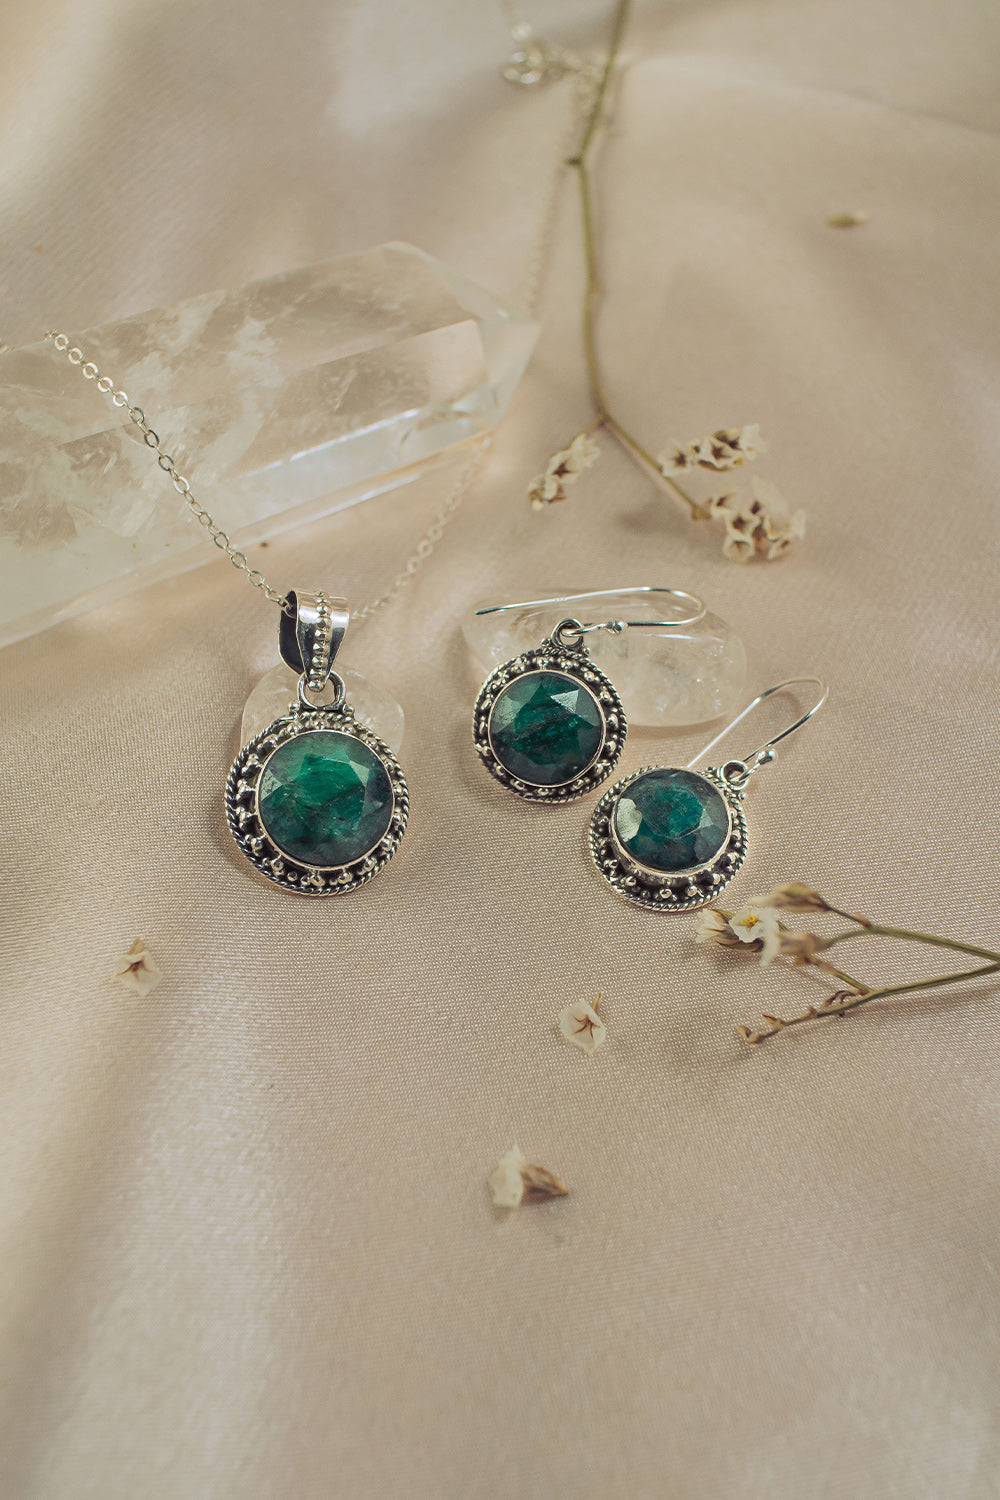 Sivalya Raw Emerald Silver Necklace and Earrings Jewelry Set - Aurora